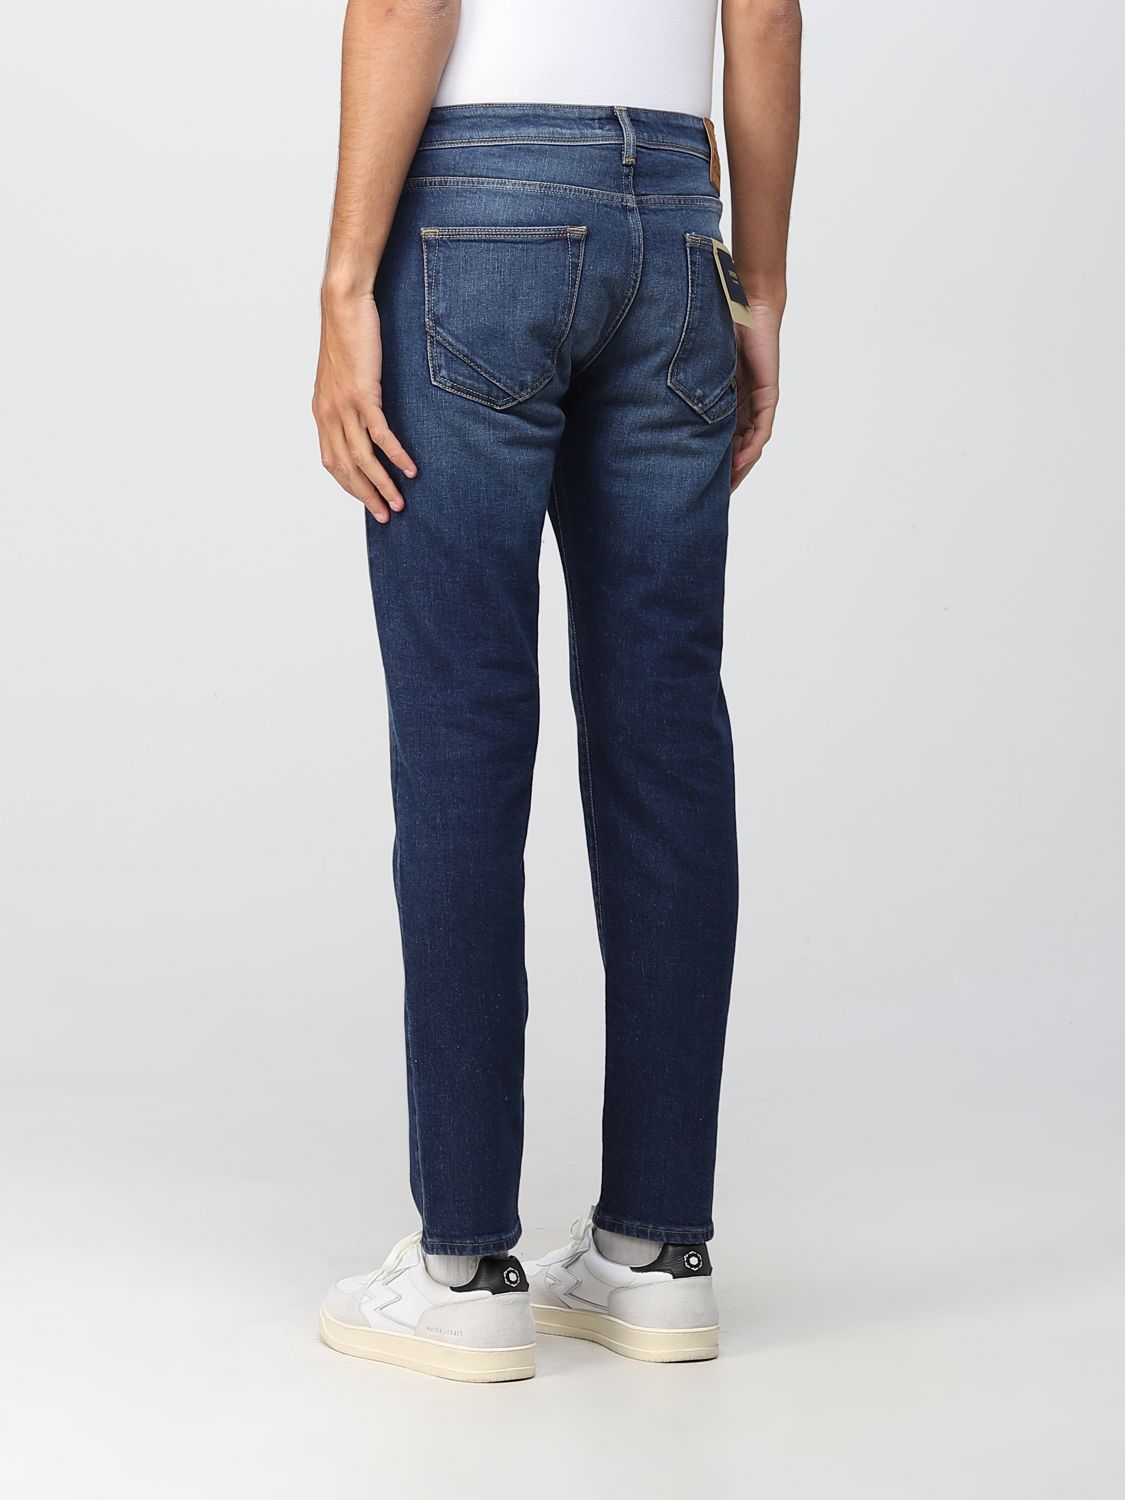 INCOTEX: jeans for man - | Incotex jeans BDPS000200540W3 online on